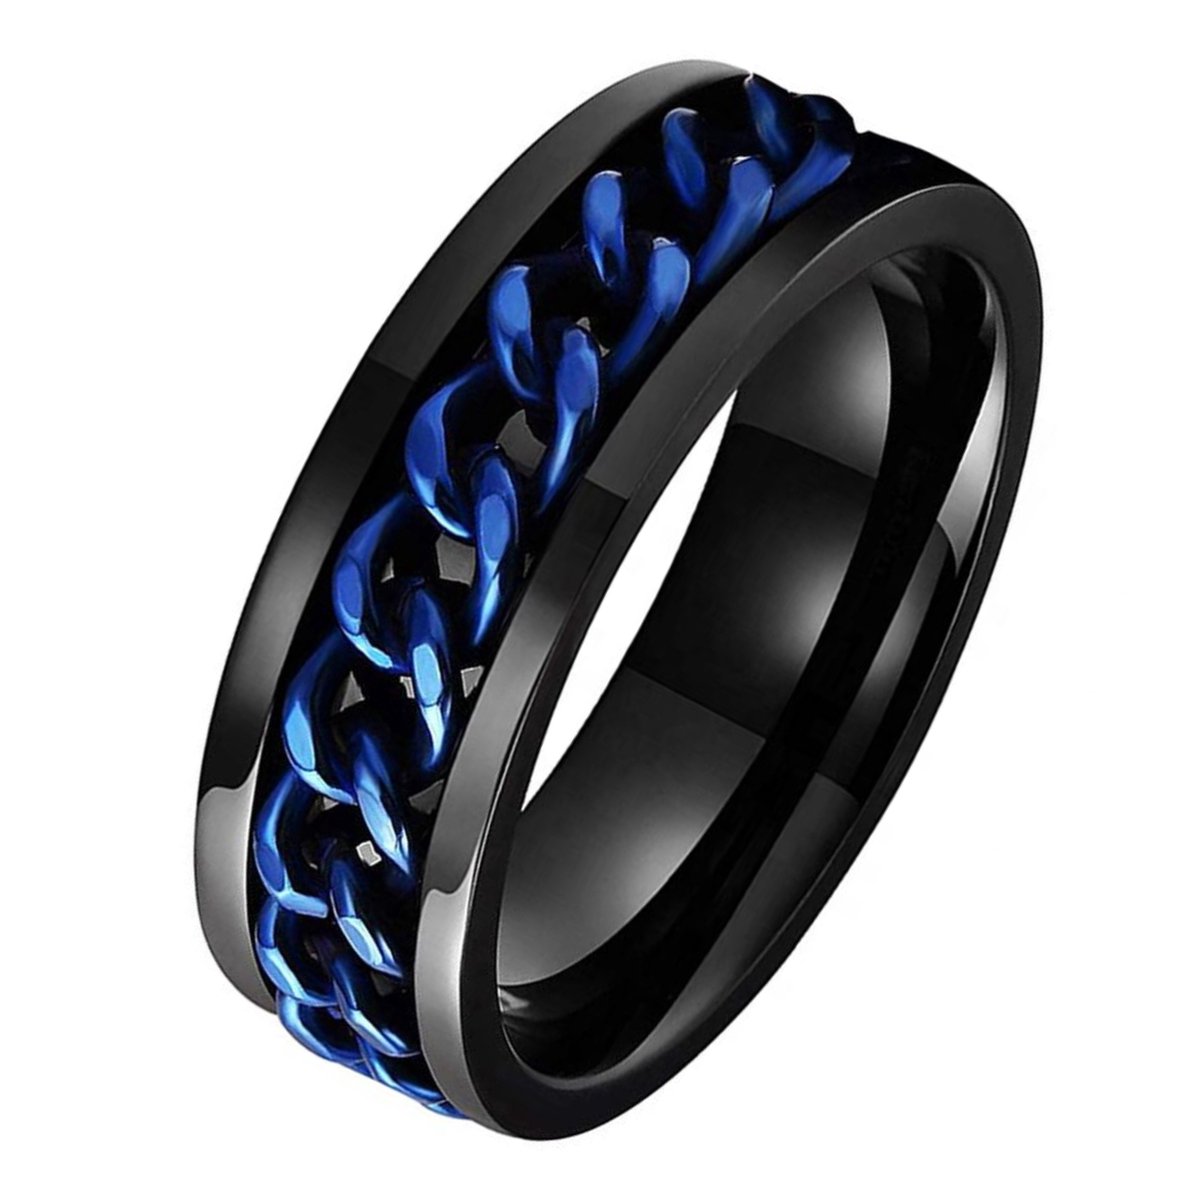 Anxiety Ring - (Kettinkje) - Stress Ring - Fidget Ring - Anxiety Ring For Finger - Draaibare Ring - Spinning Ring - Zwart-Blauw - (23.25mm / maat 73)